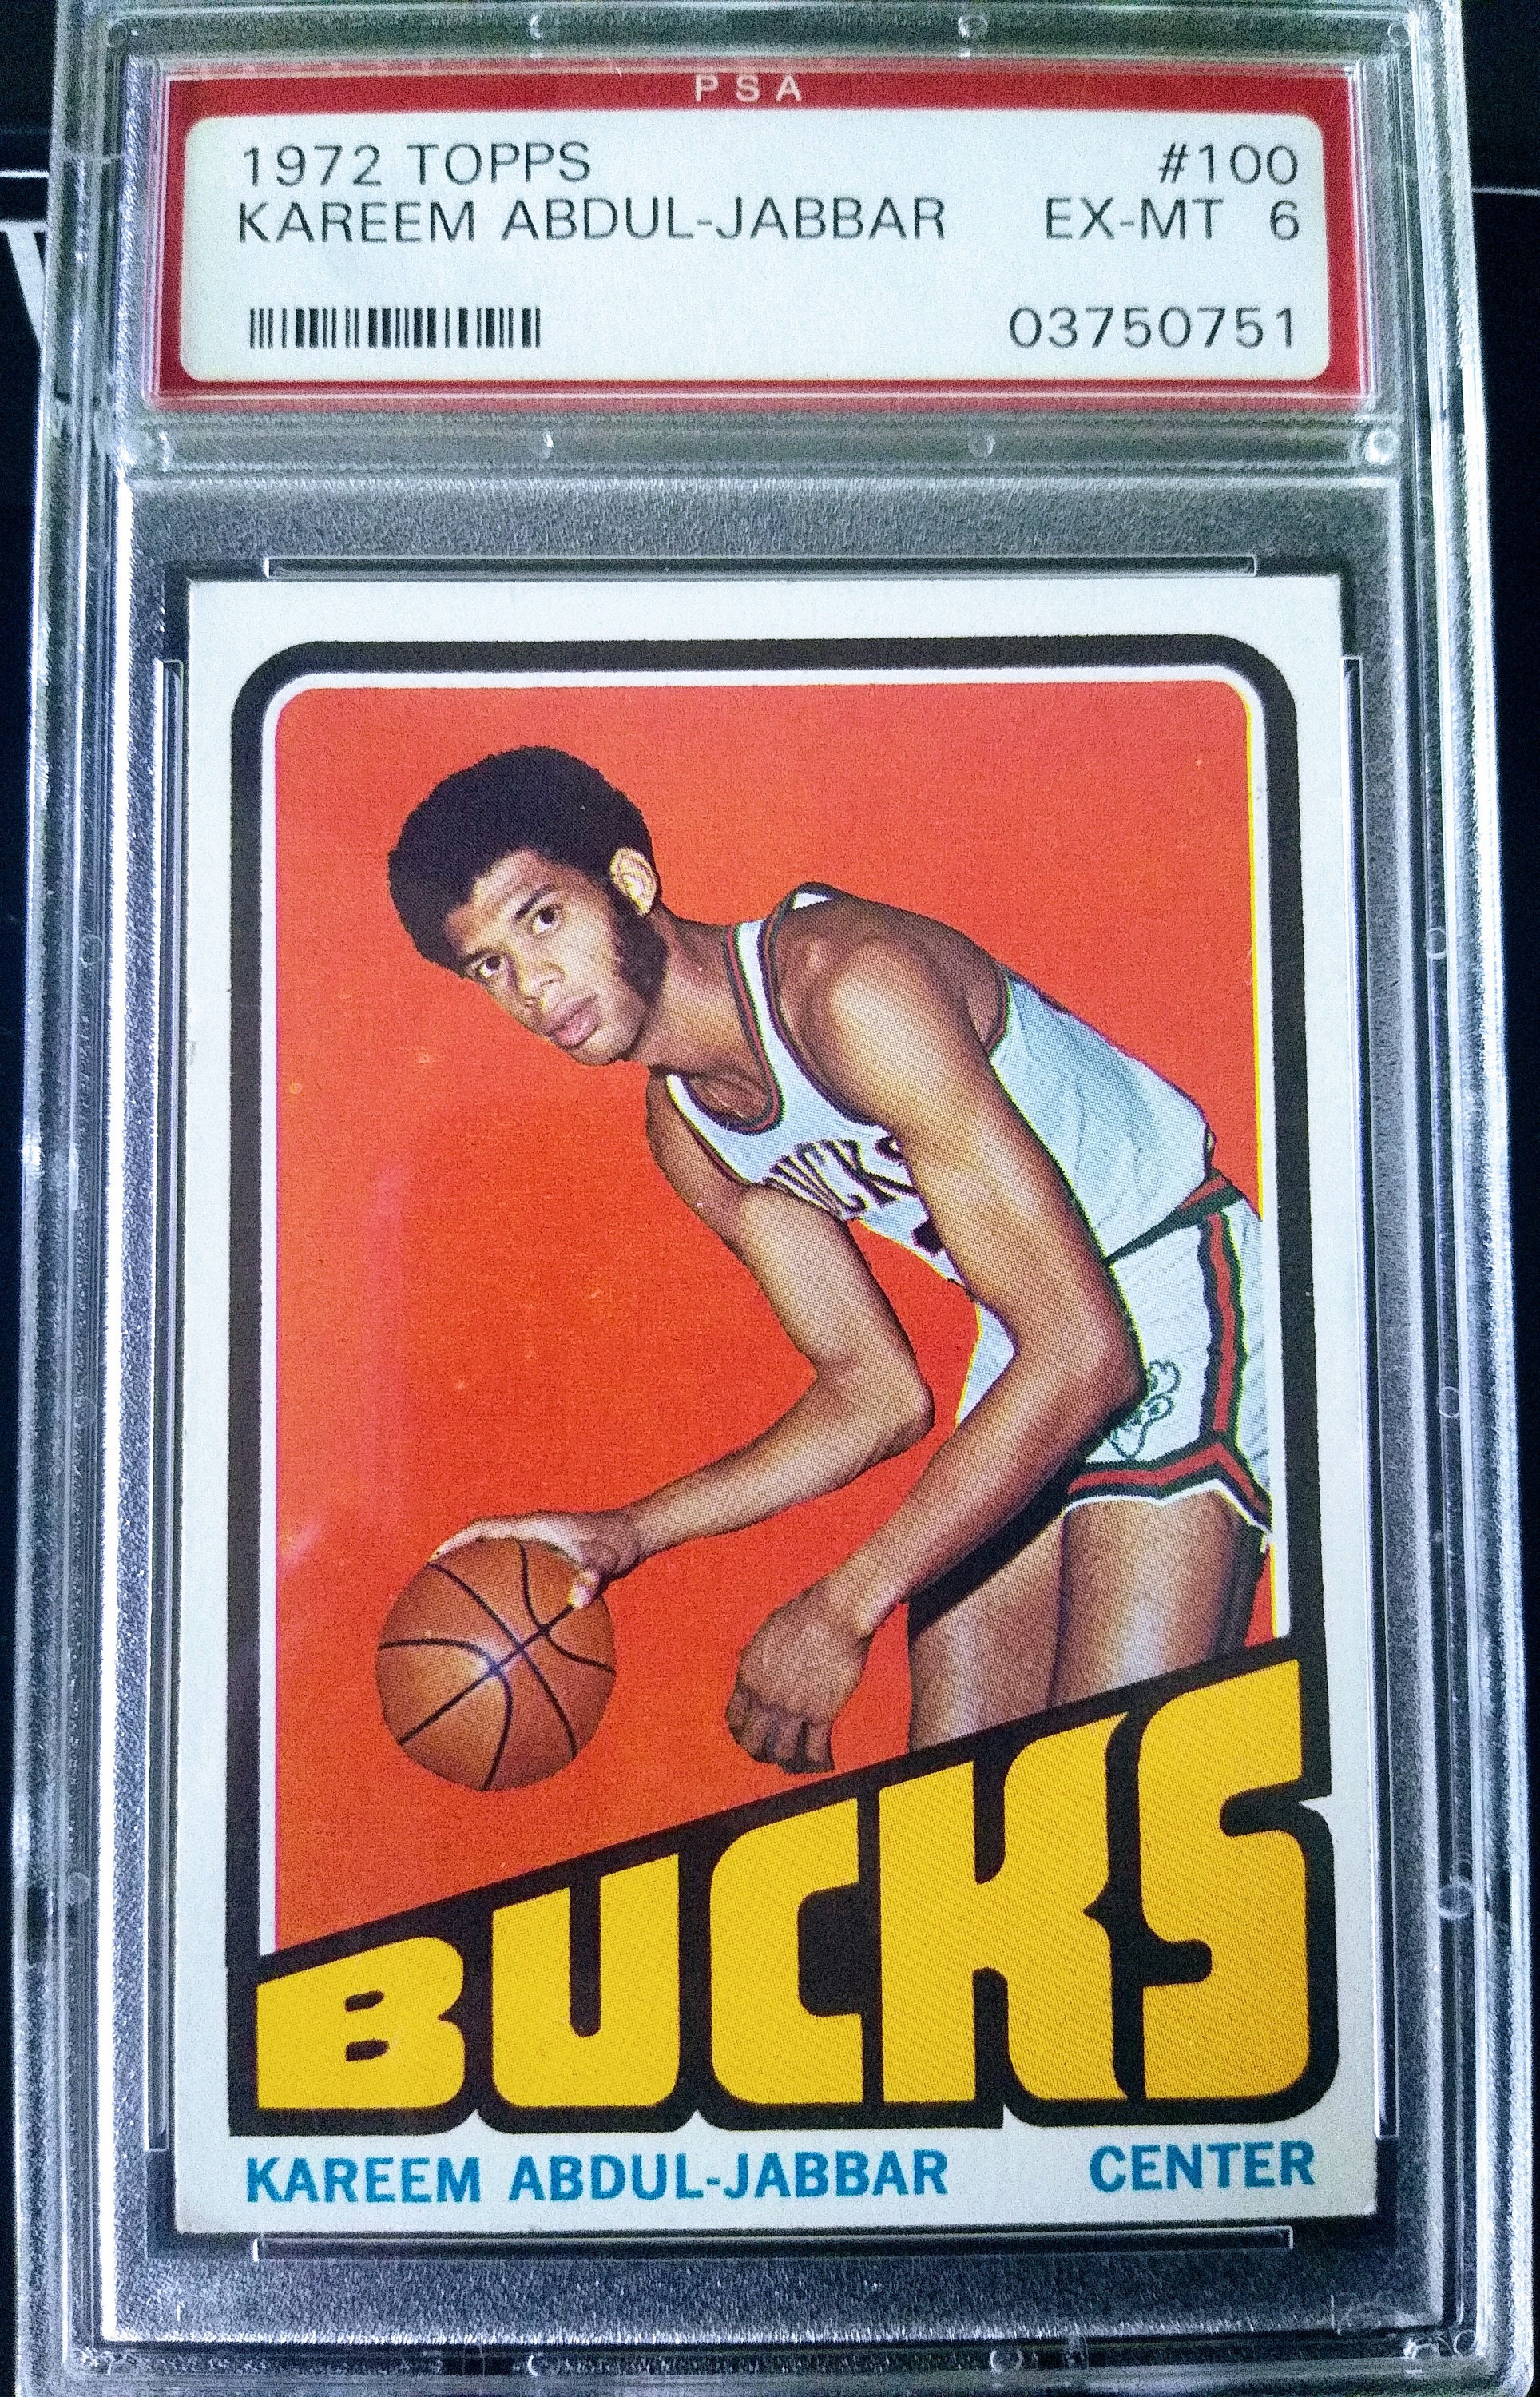 Milwaukee Bucks on X: OTD in 1972 Kareem Abdul-Jabbar scored 41 points  & 11 rebounds in the opening game of the 1972-73 season. He is 1 of 9  players in NBA history